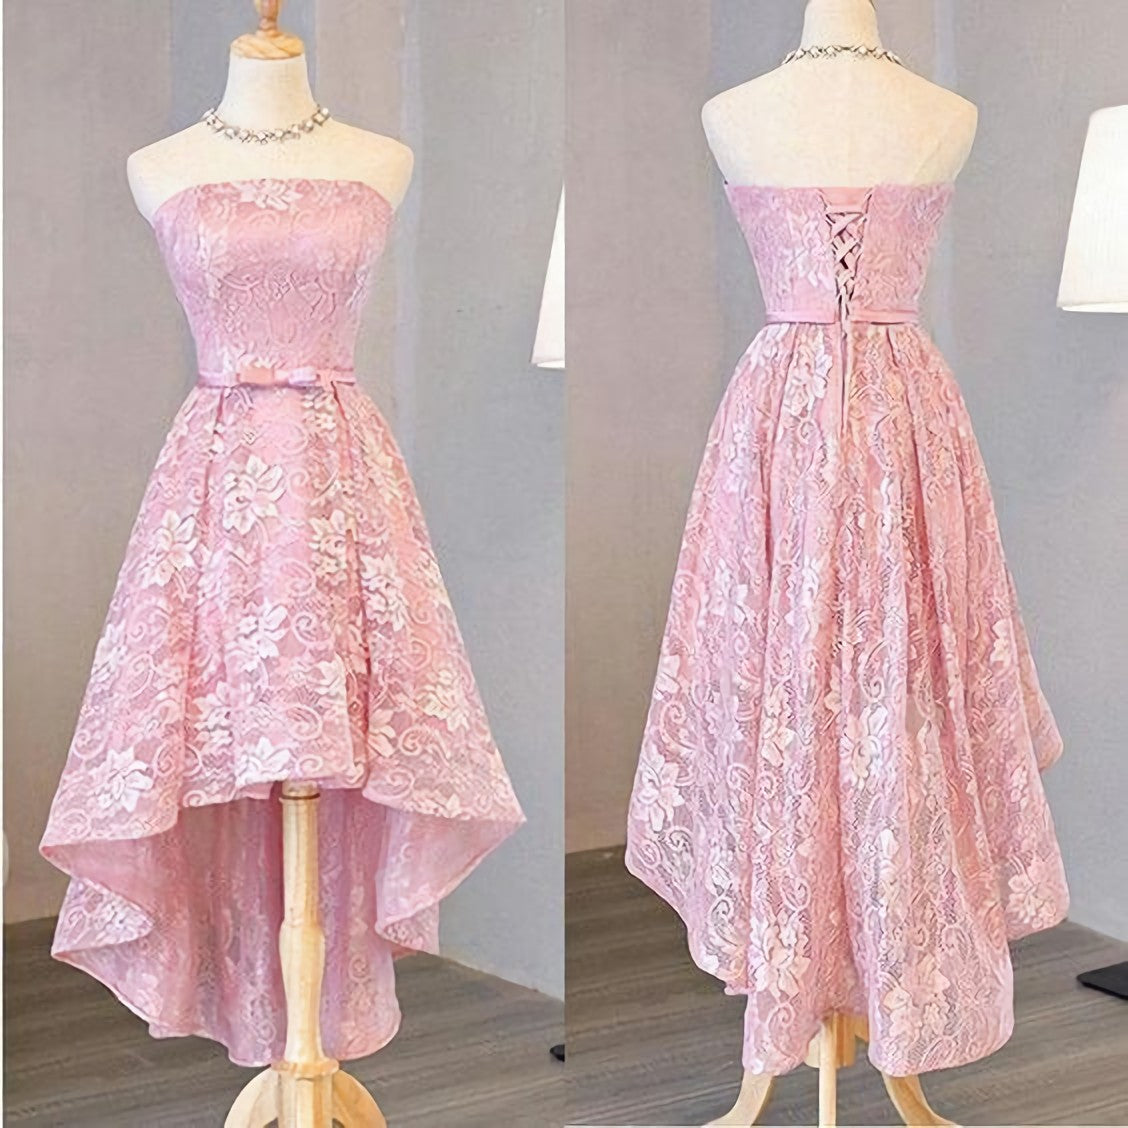 Prom Dresses Country, Nice Pink High Low Lace Dress, Pink High Low Dress, Lace Dress, Homecoming Dress